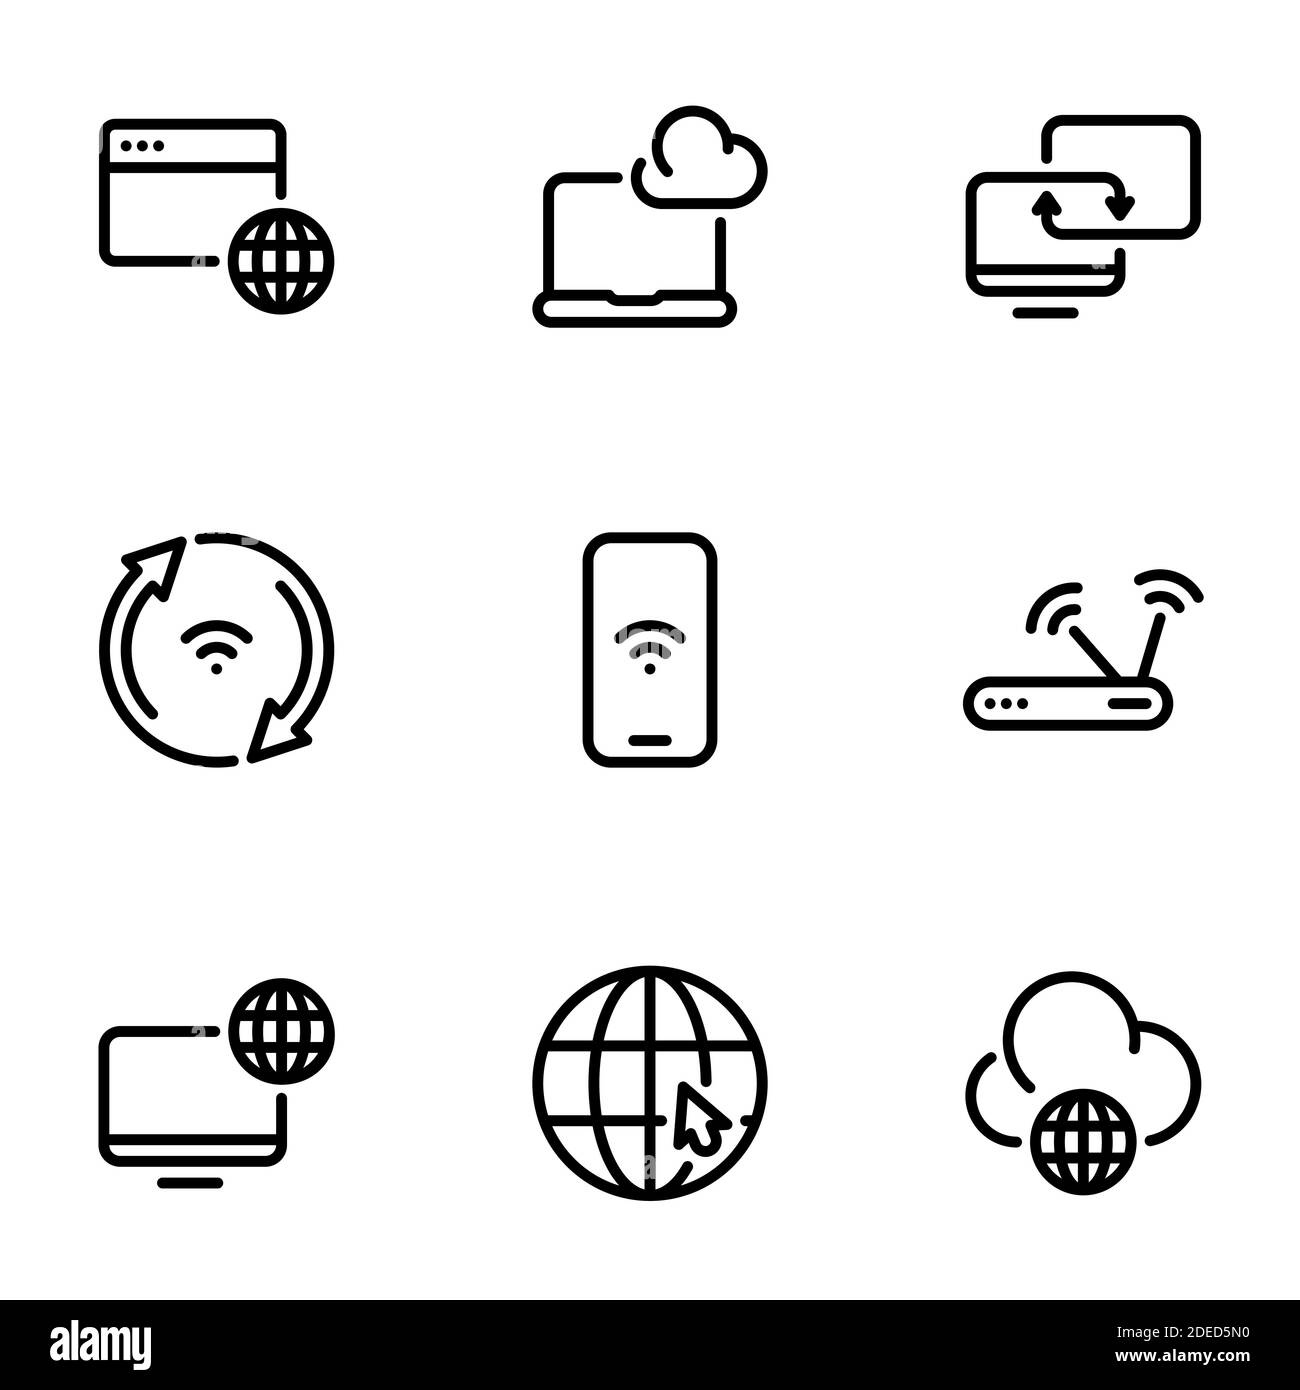 Set of black vector icons, isolated on white background, on theme Internet communication Stock Vector